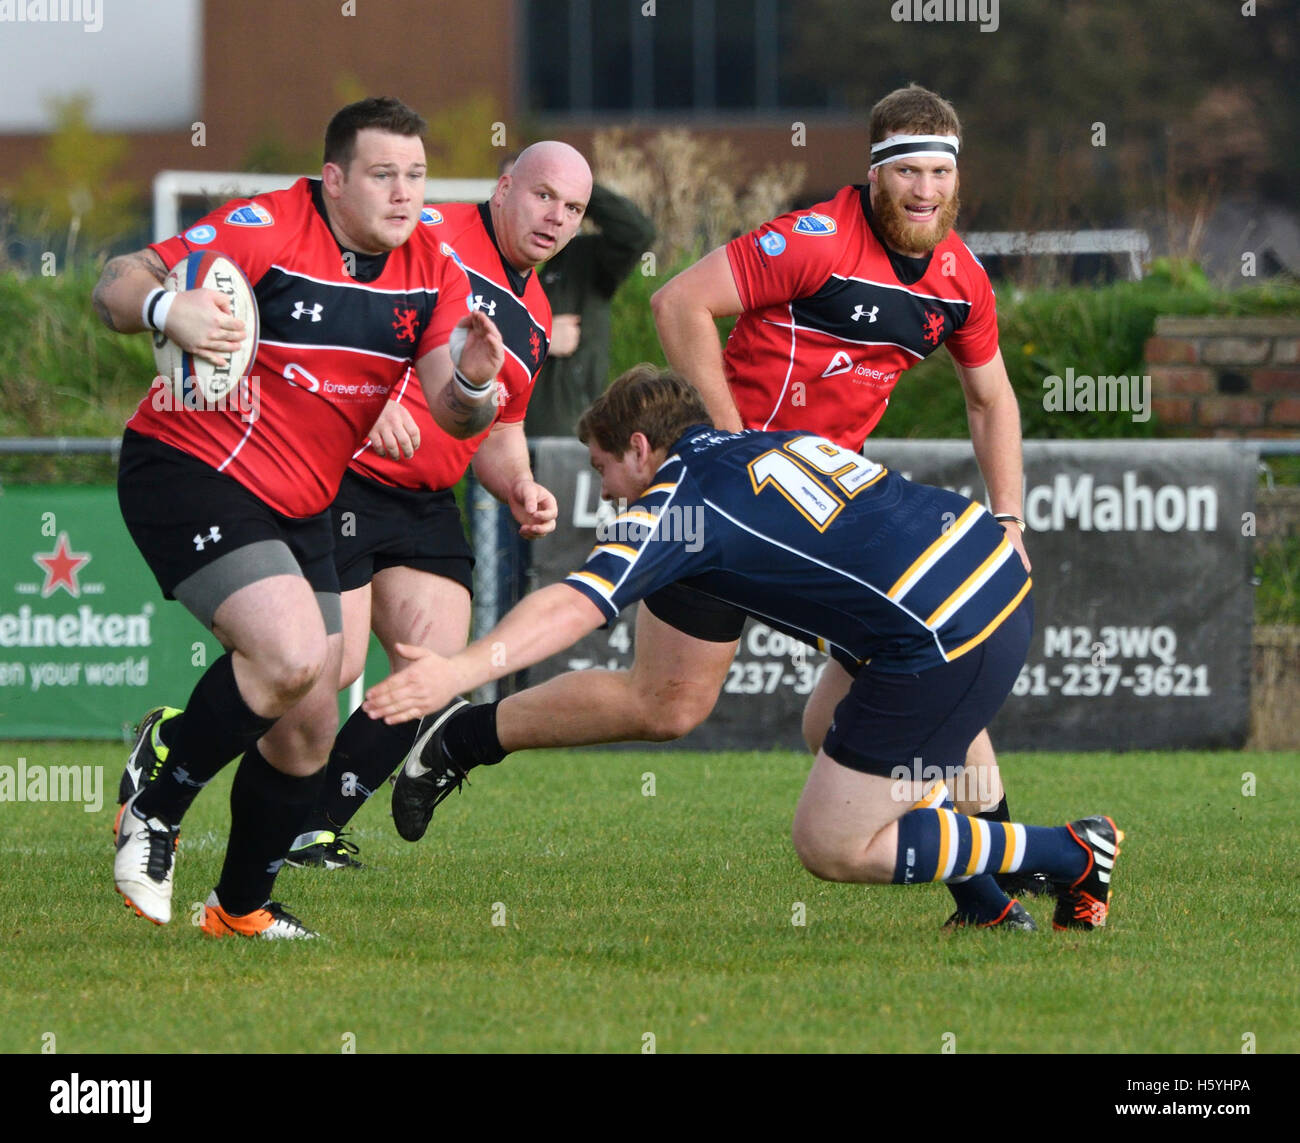 Manchester  UK  22nd October 2016  Action from the South Lancs/Cheshire Division 1 match between Broughton Park, in red, and Anselmians, in hoops. Broughton Park win 59-12 to move to fourth in the table. Stock Photo